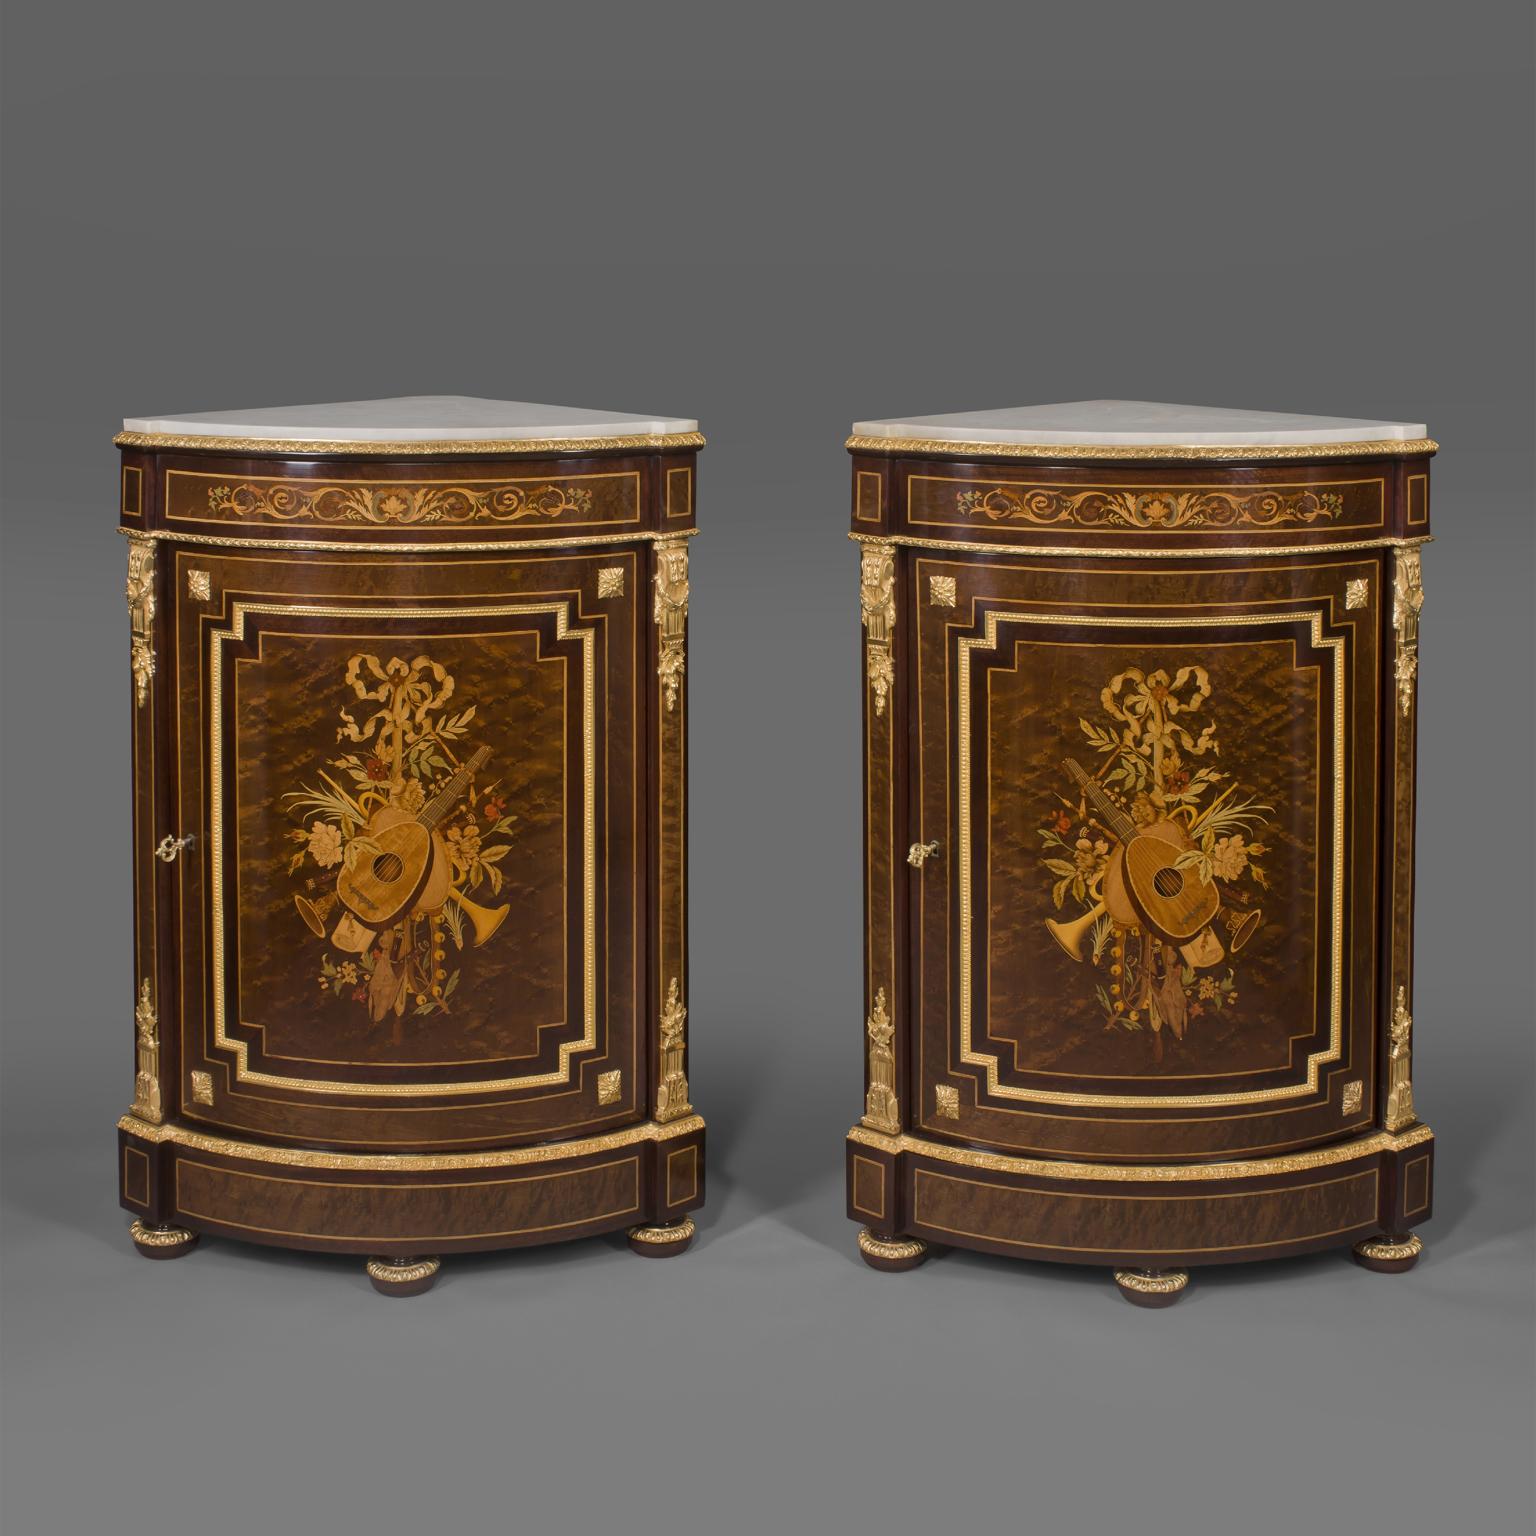 A fine pair of Louis XVI style gilt-bronze and marquetry inlaid Encoignures by Paul Sormani.

Stamped to the reverse of the bronze top rim's 'PS' for Paul Sormani. 

Each corner cupboard has a shaped white marble top and fine gilt-bronze mounts,